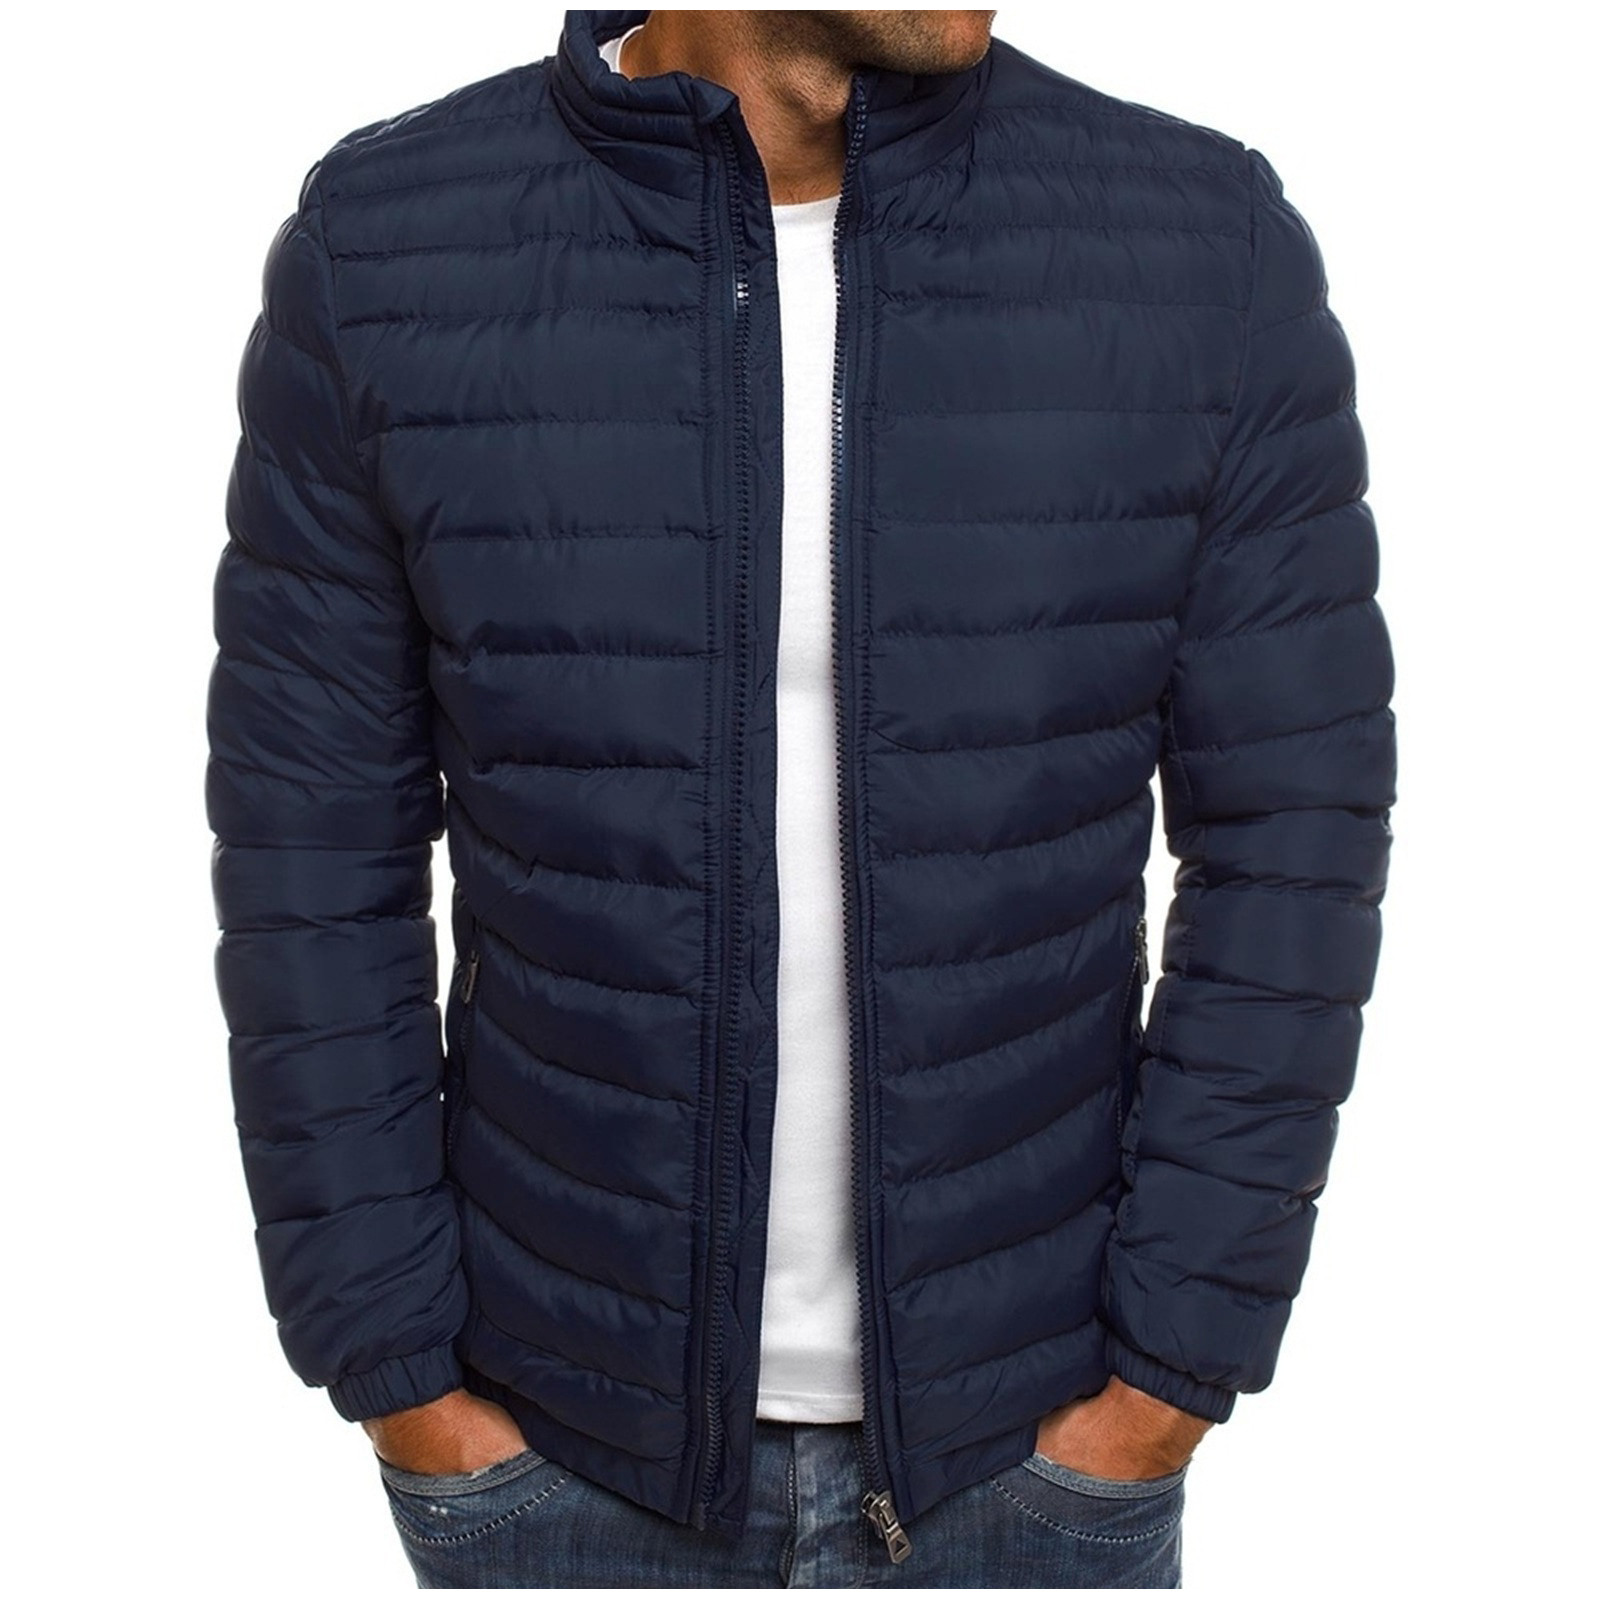 TIHLMK Men's Down Jackets & Coats Deals Clearance Men's Solid Color Jacket Cotton Padded Jacket Fashion Cotton Padded Jacket Men's Warm Cotton Padded Jacket Navy - image 1 of 3